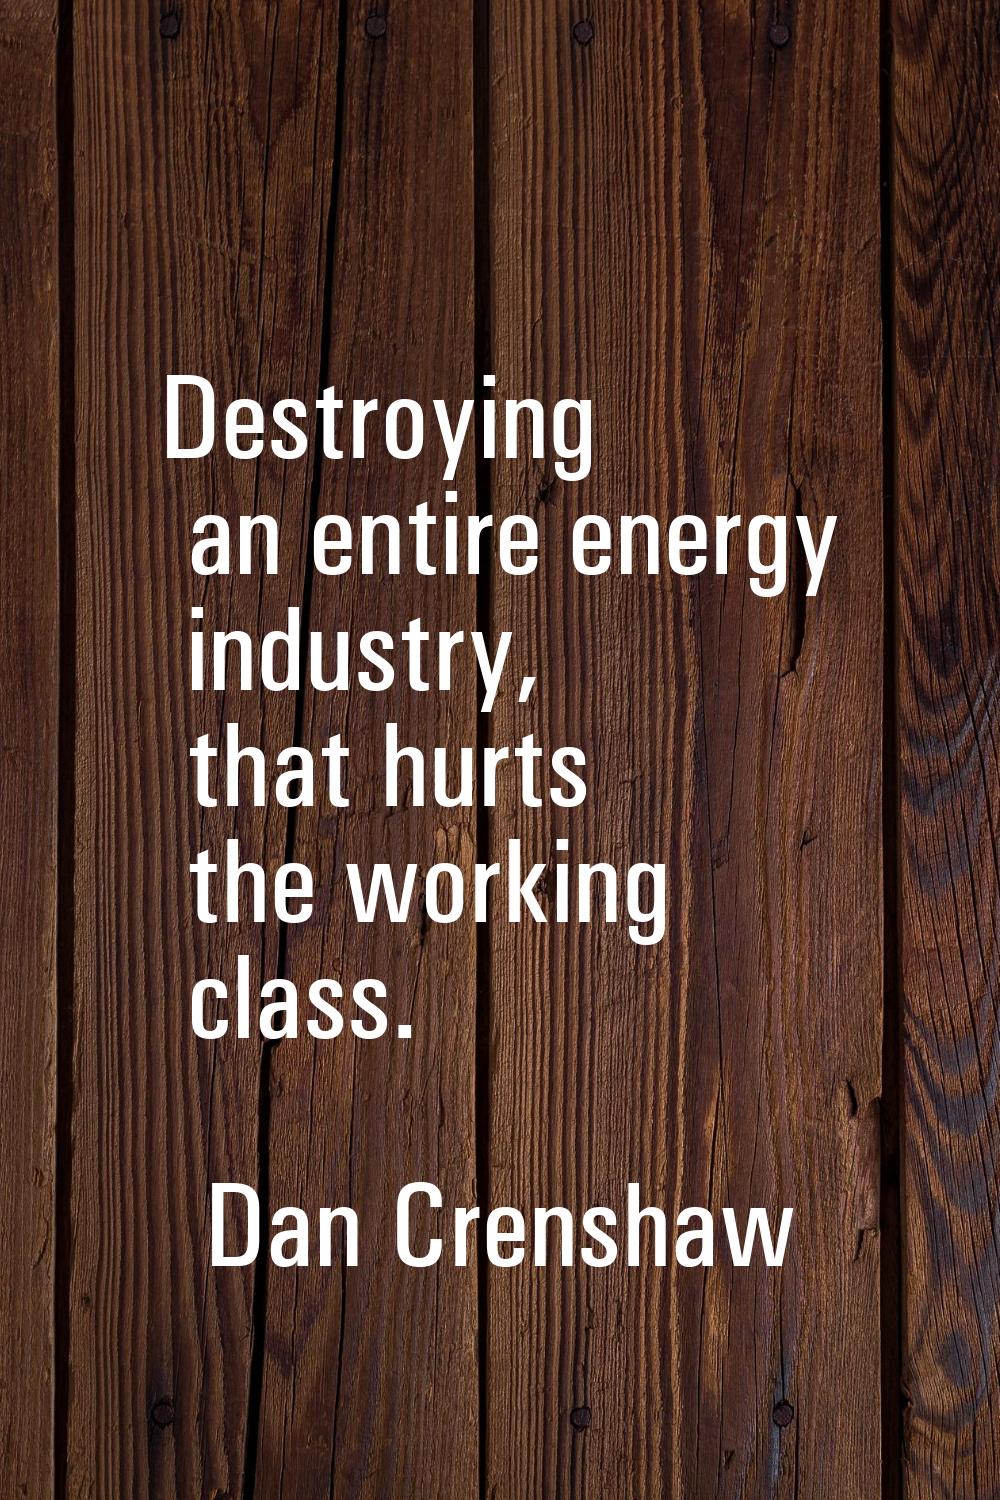 Destroying an entire energy industry, that hurts the working class.